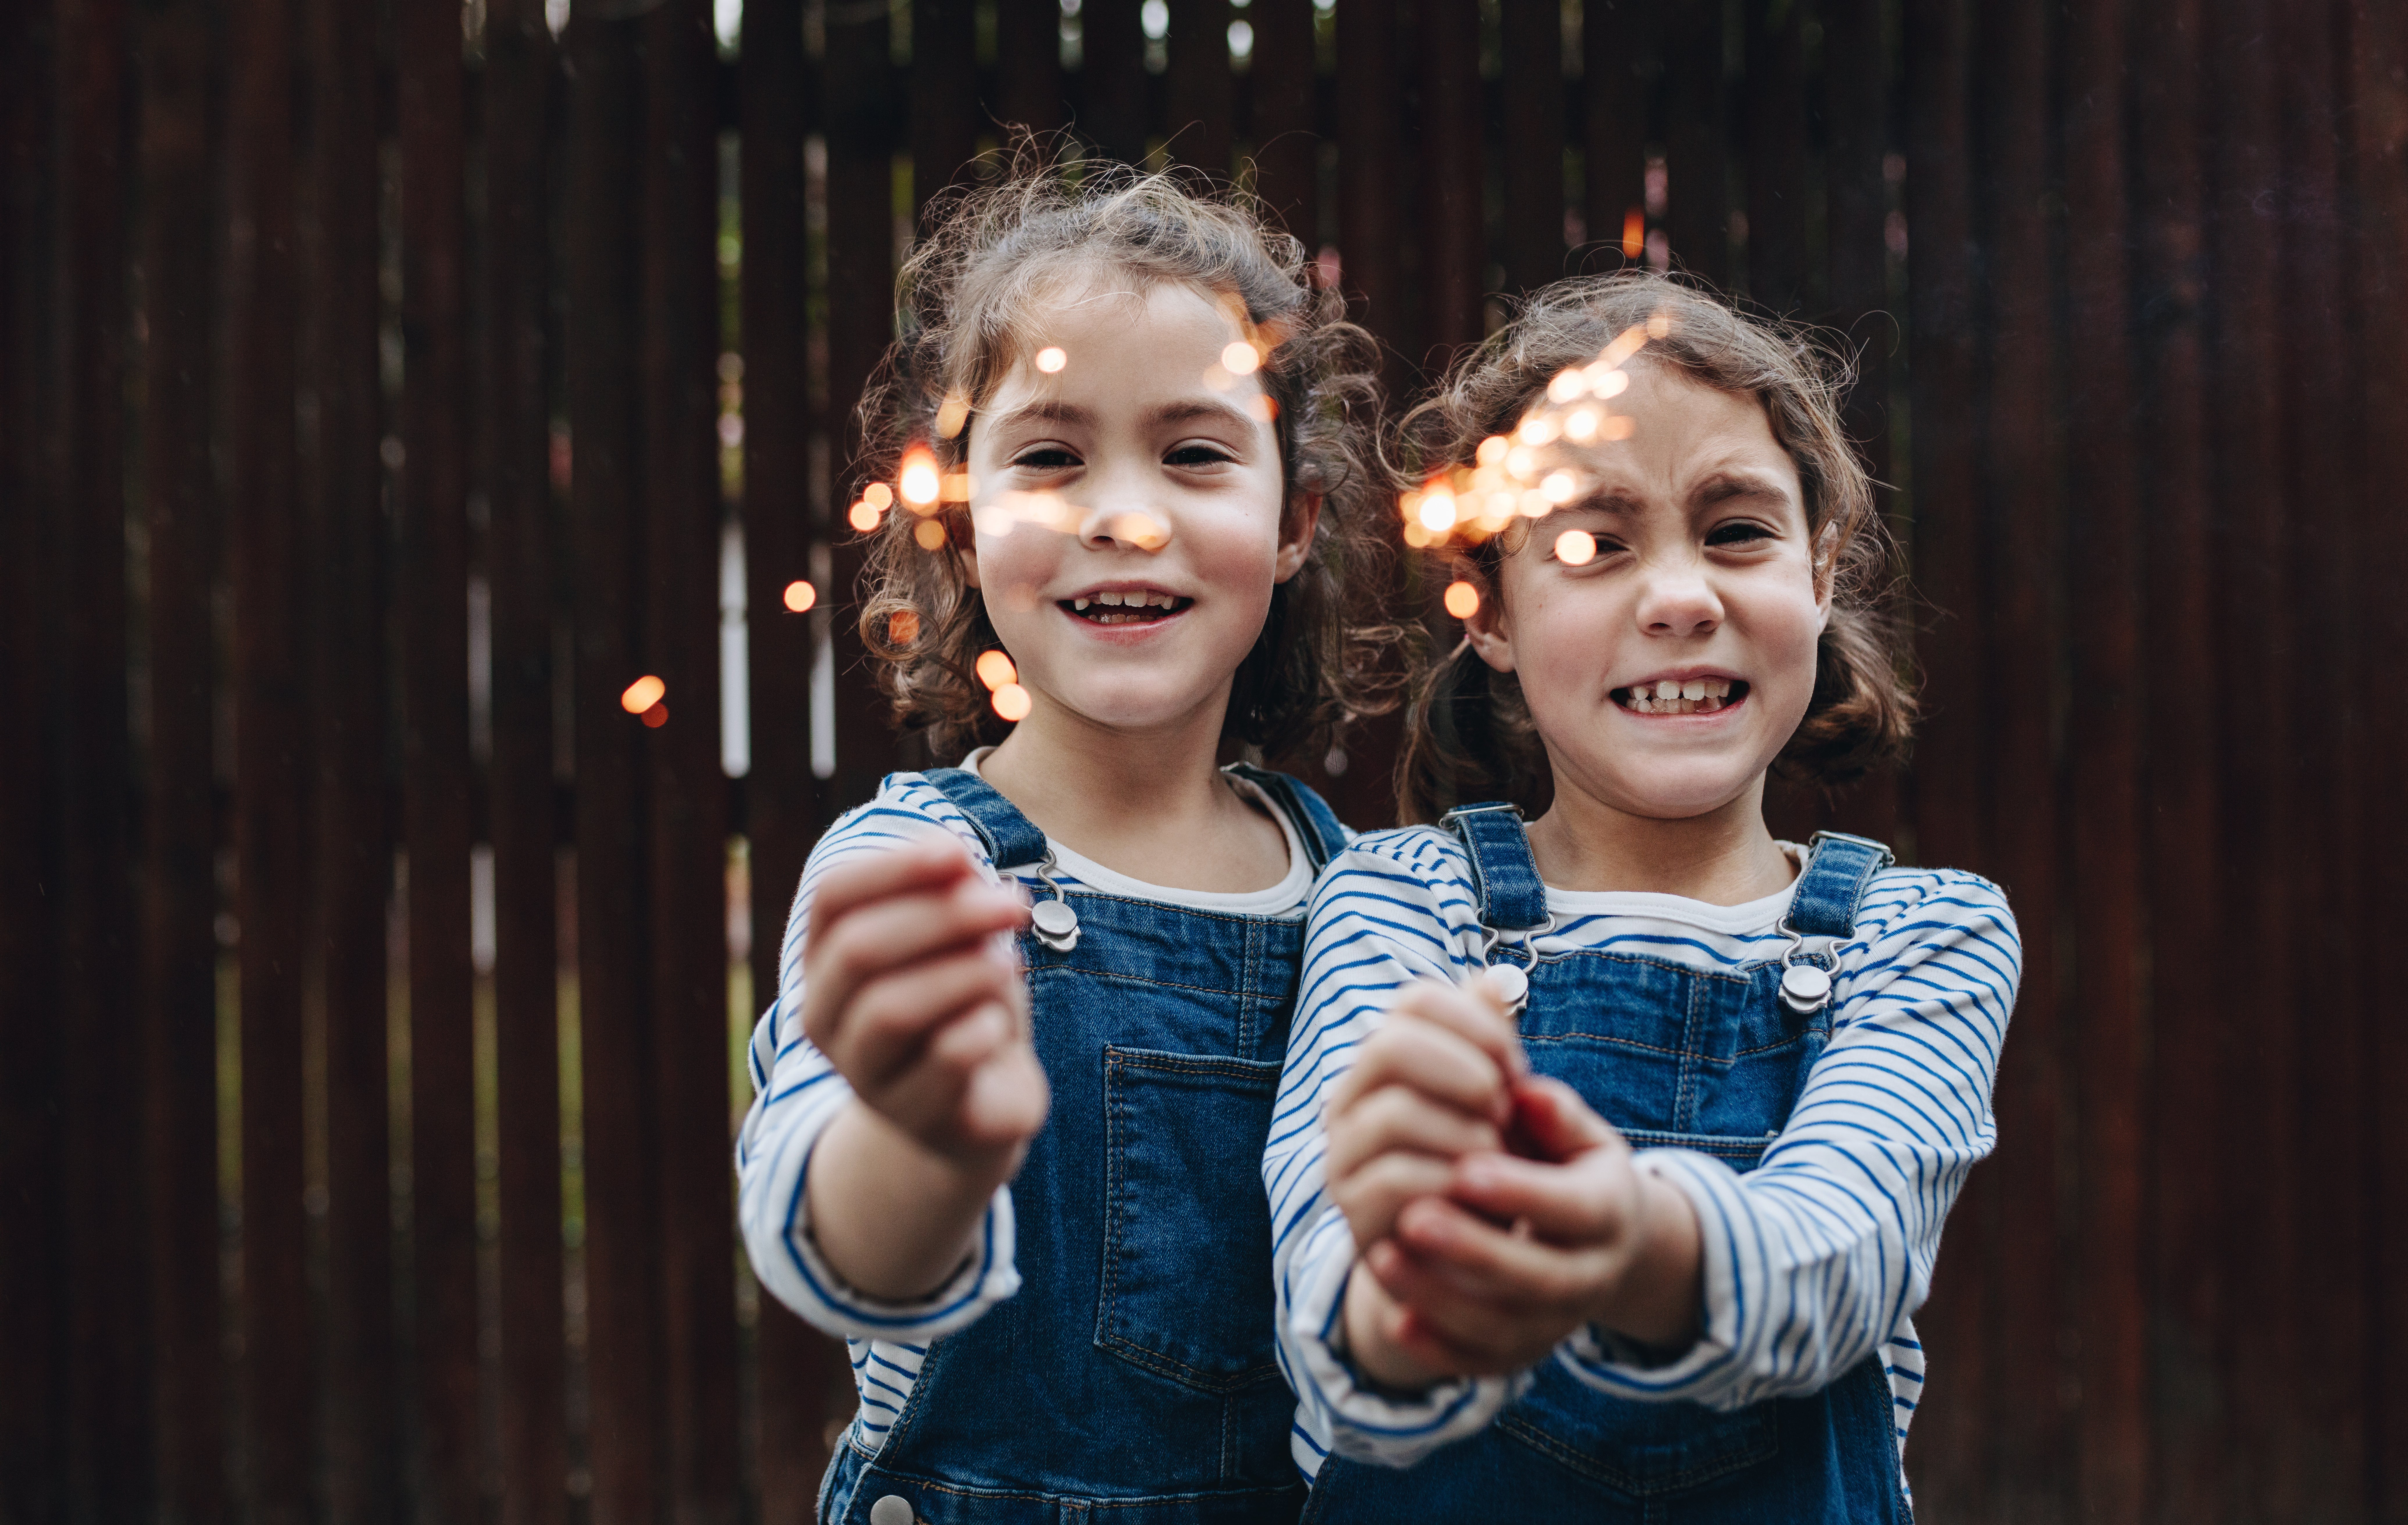 Stock image of two girls playing with fireworks. 